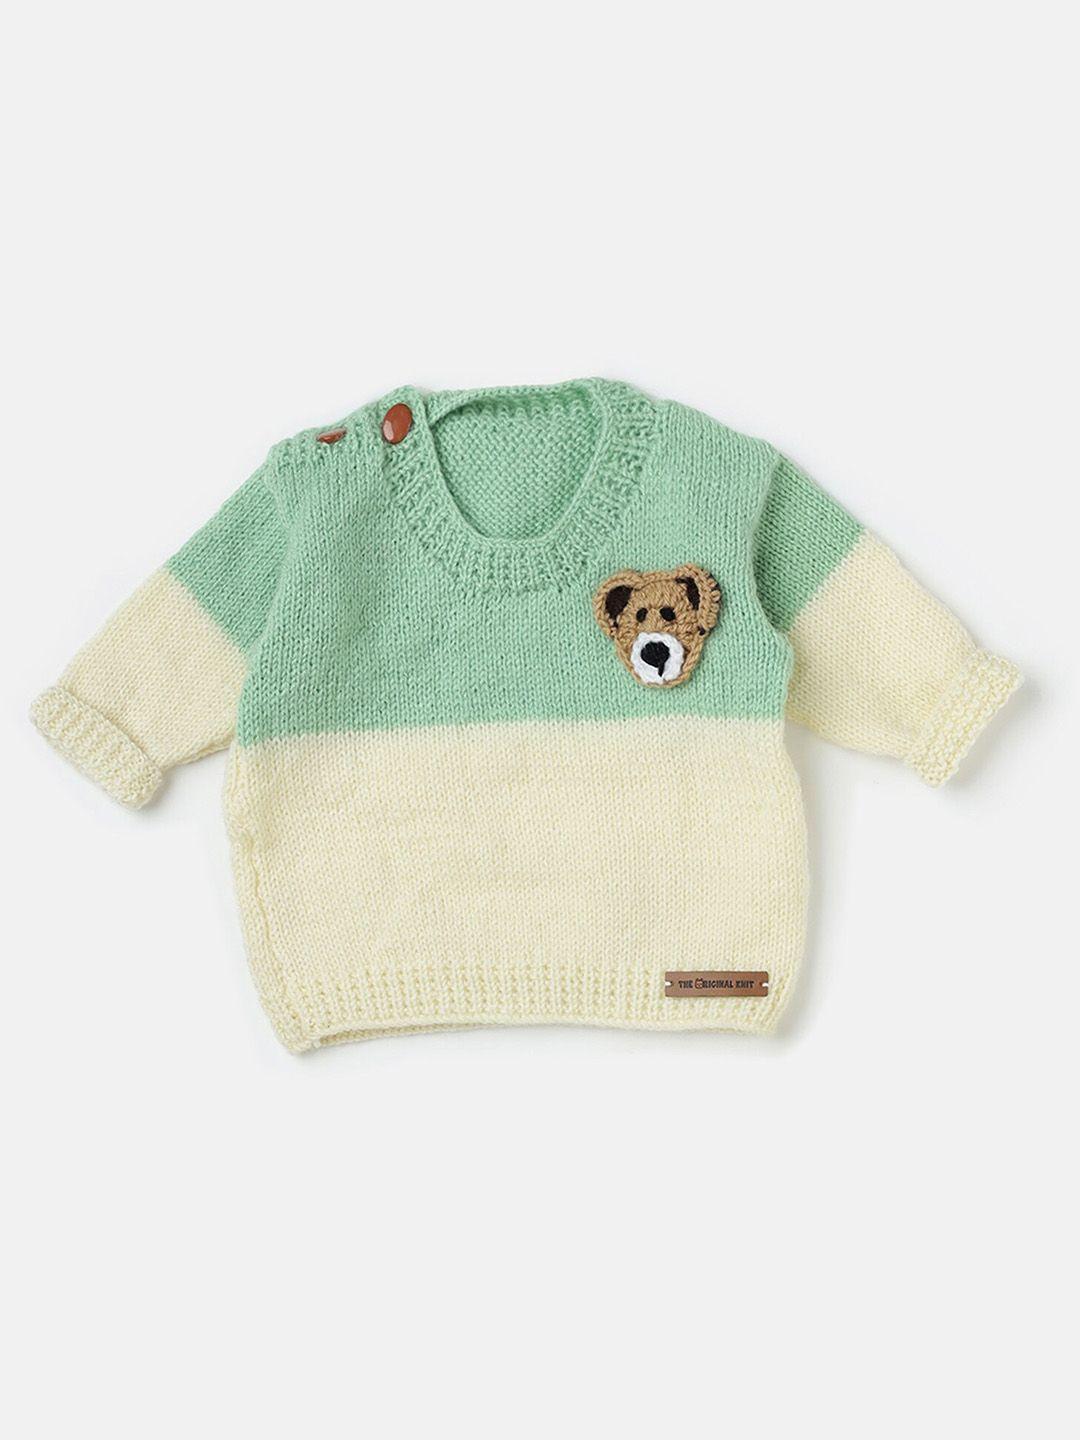 the original knit unisex kids green & cream-coloured colourblocked pullover with applique detail